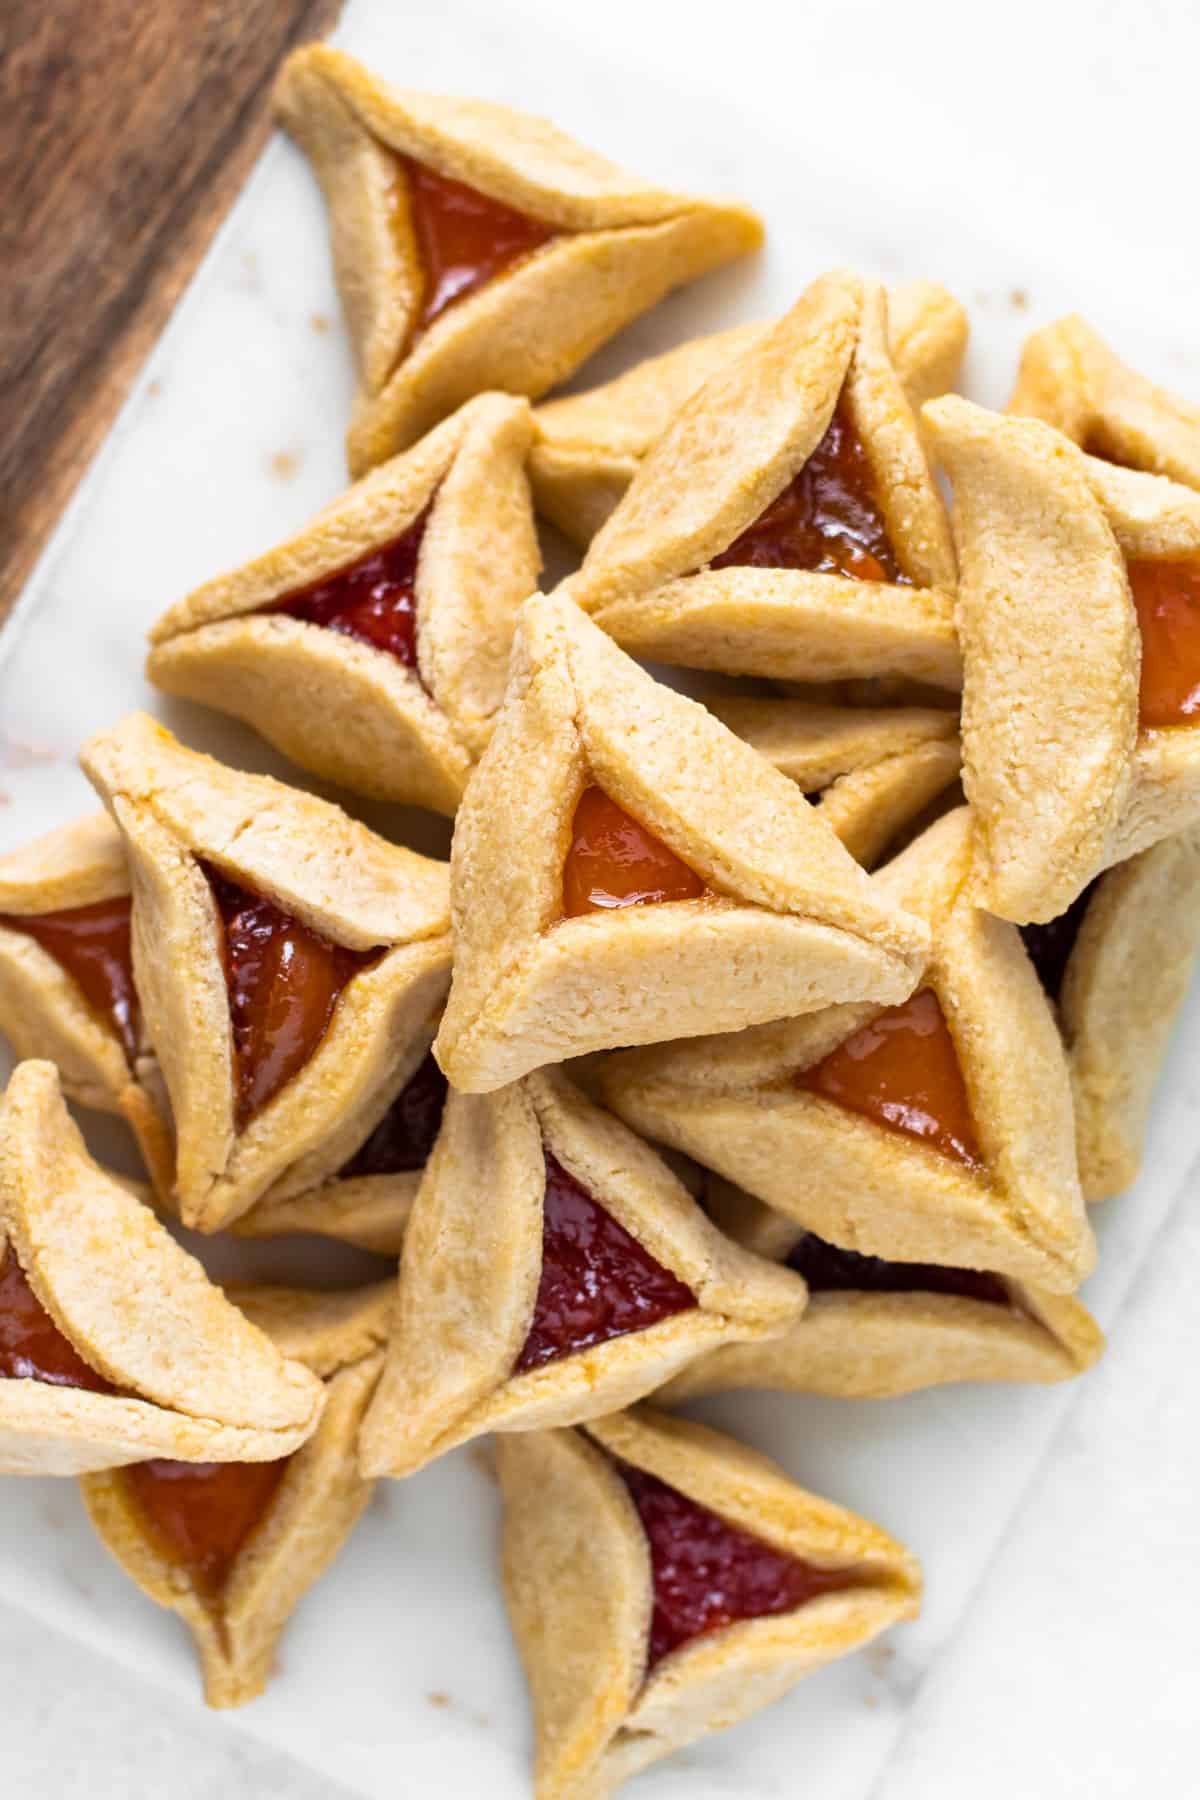 Paleo hamantaschen with apricot and raspberry jam.